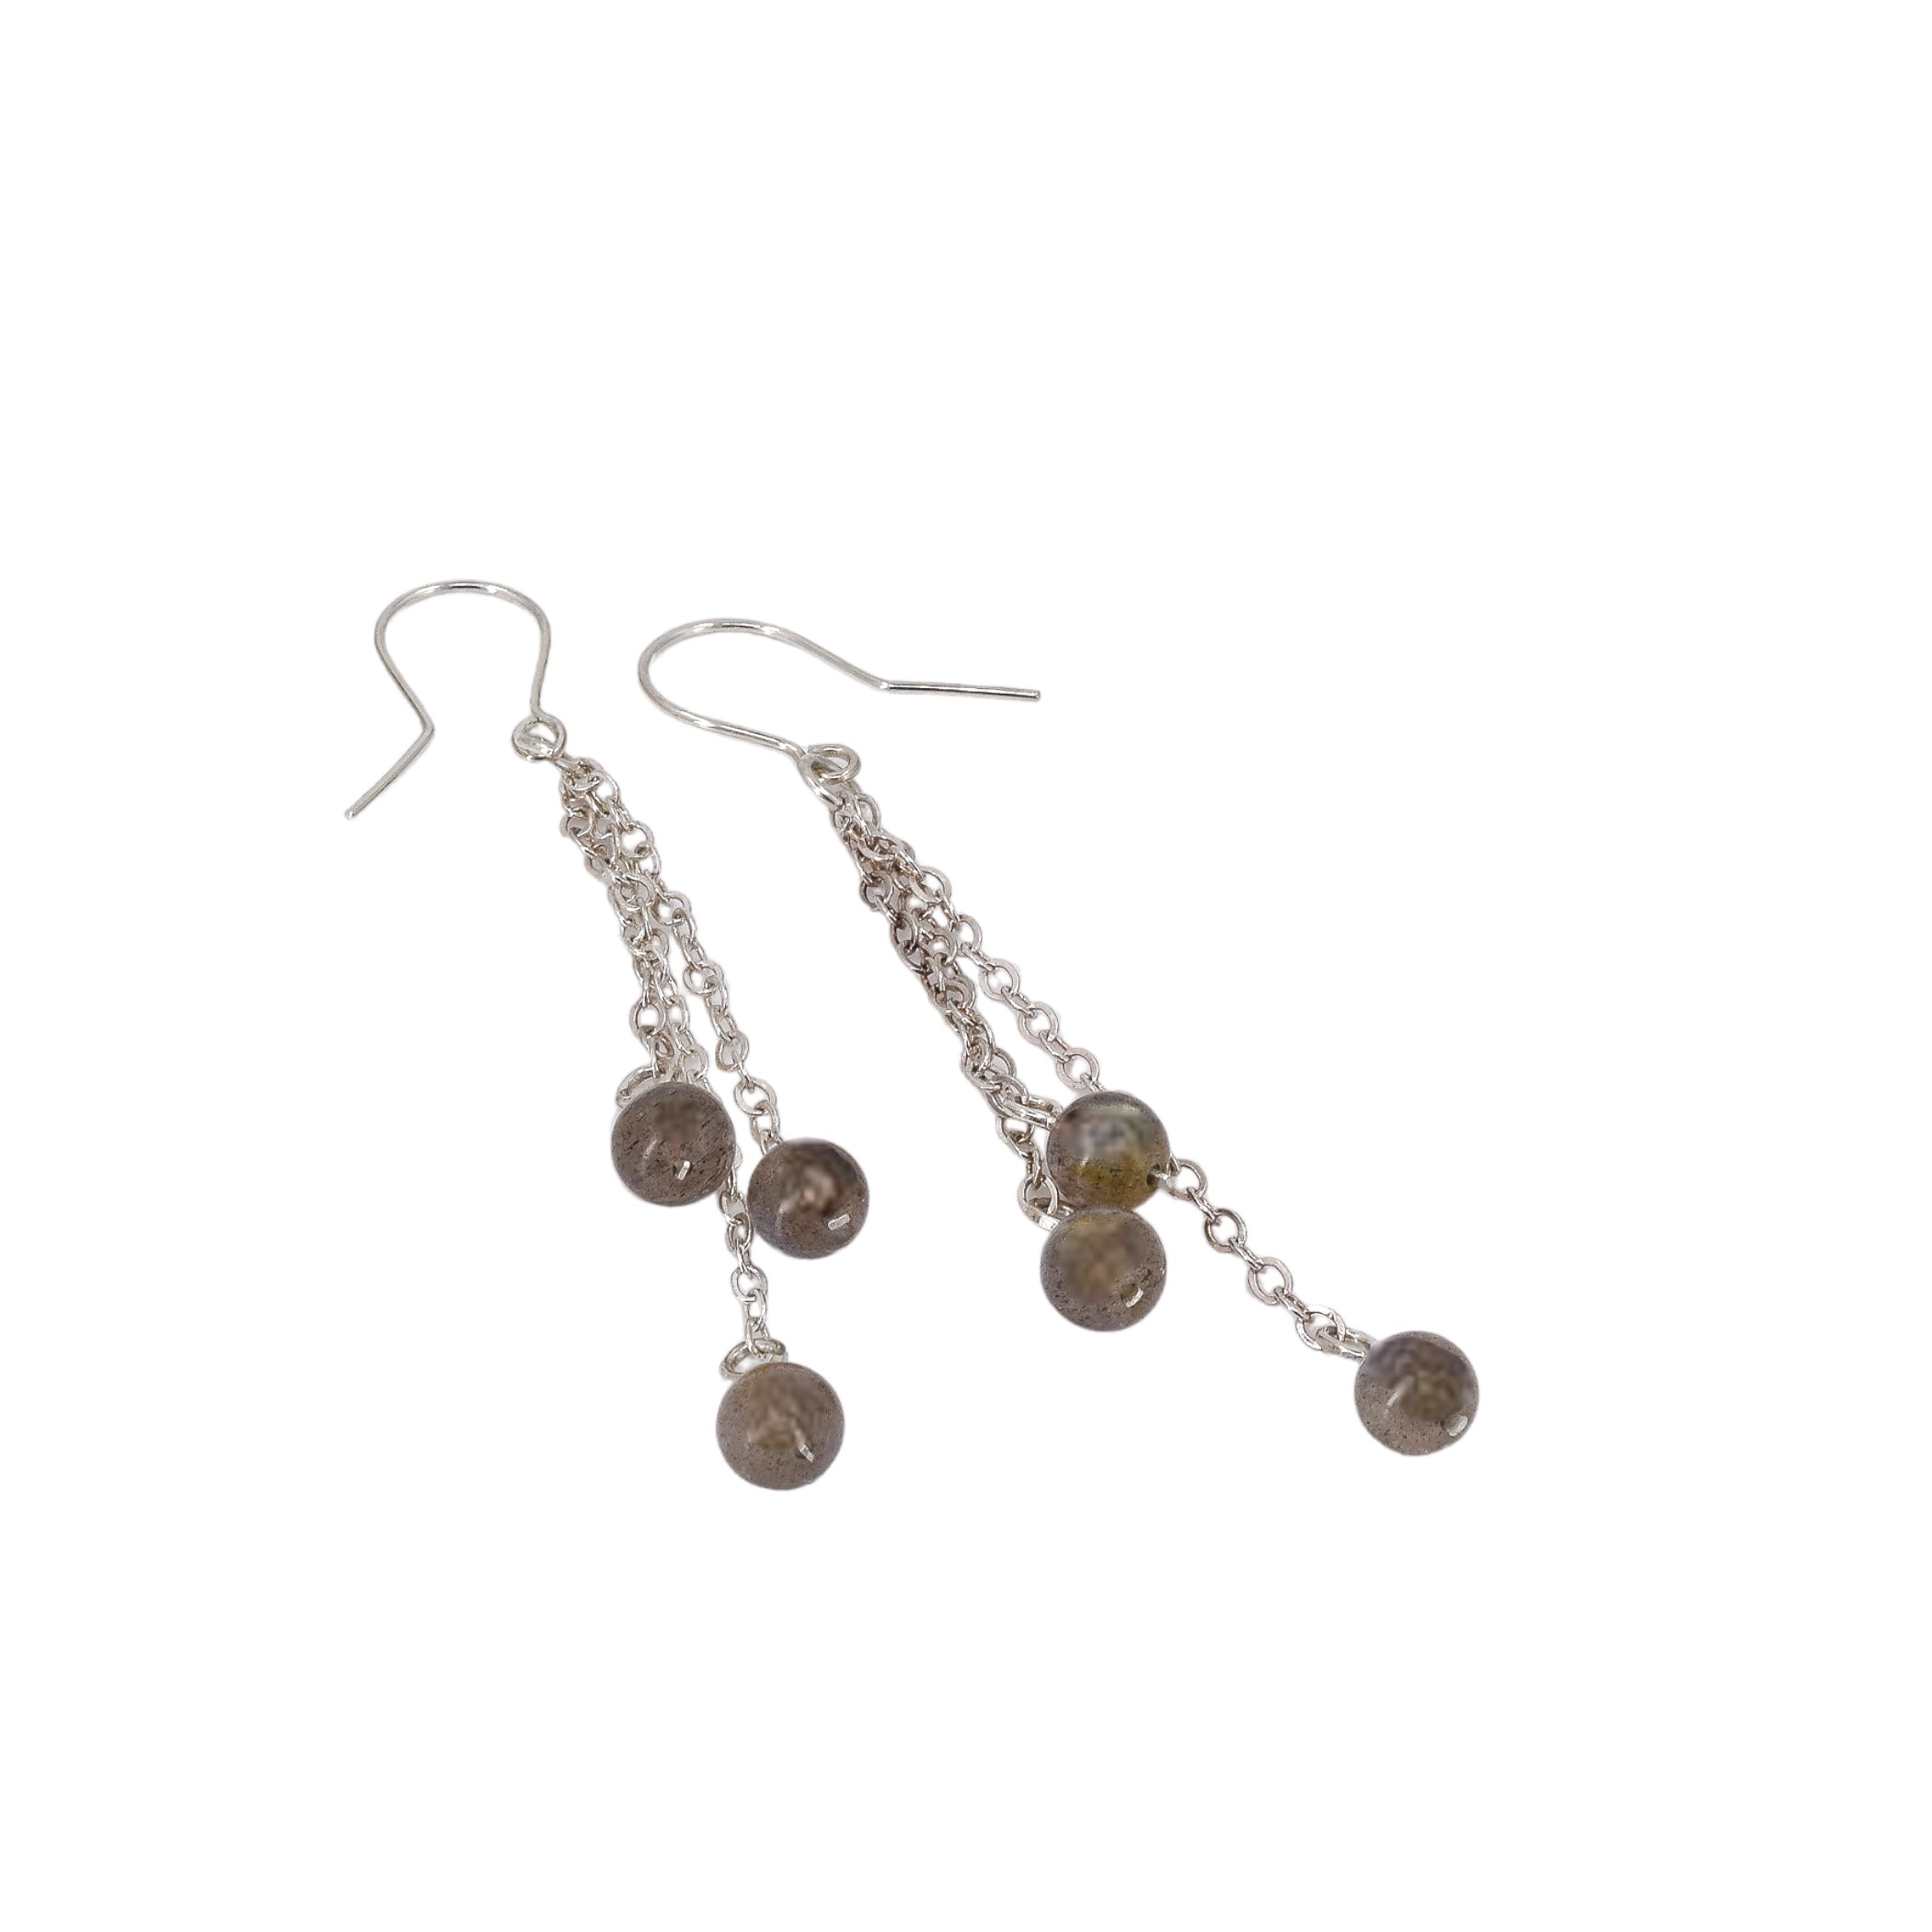 Long labradorite dangle earrings featuring three strands of chain with stones hanging at the end. 